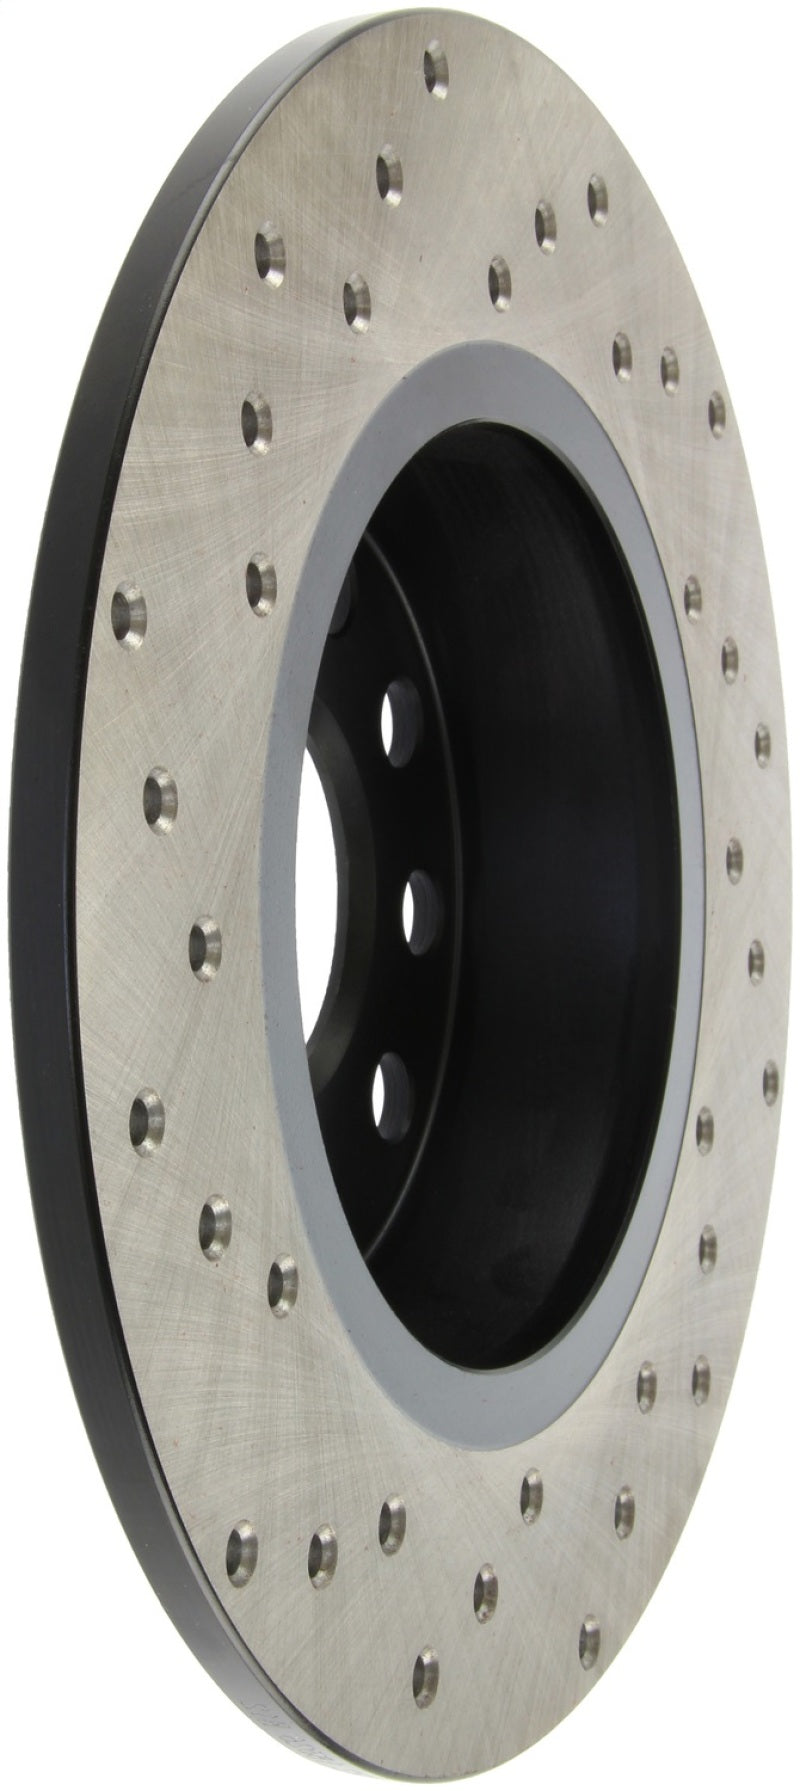 StopTech Drilled Sport Brake Rotor.